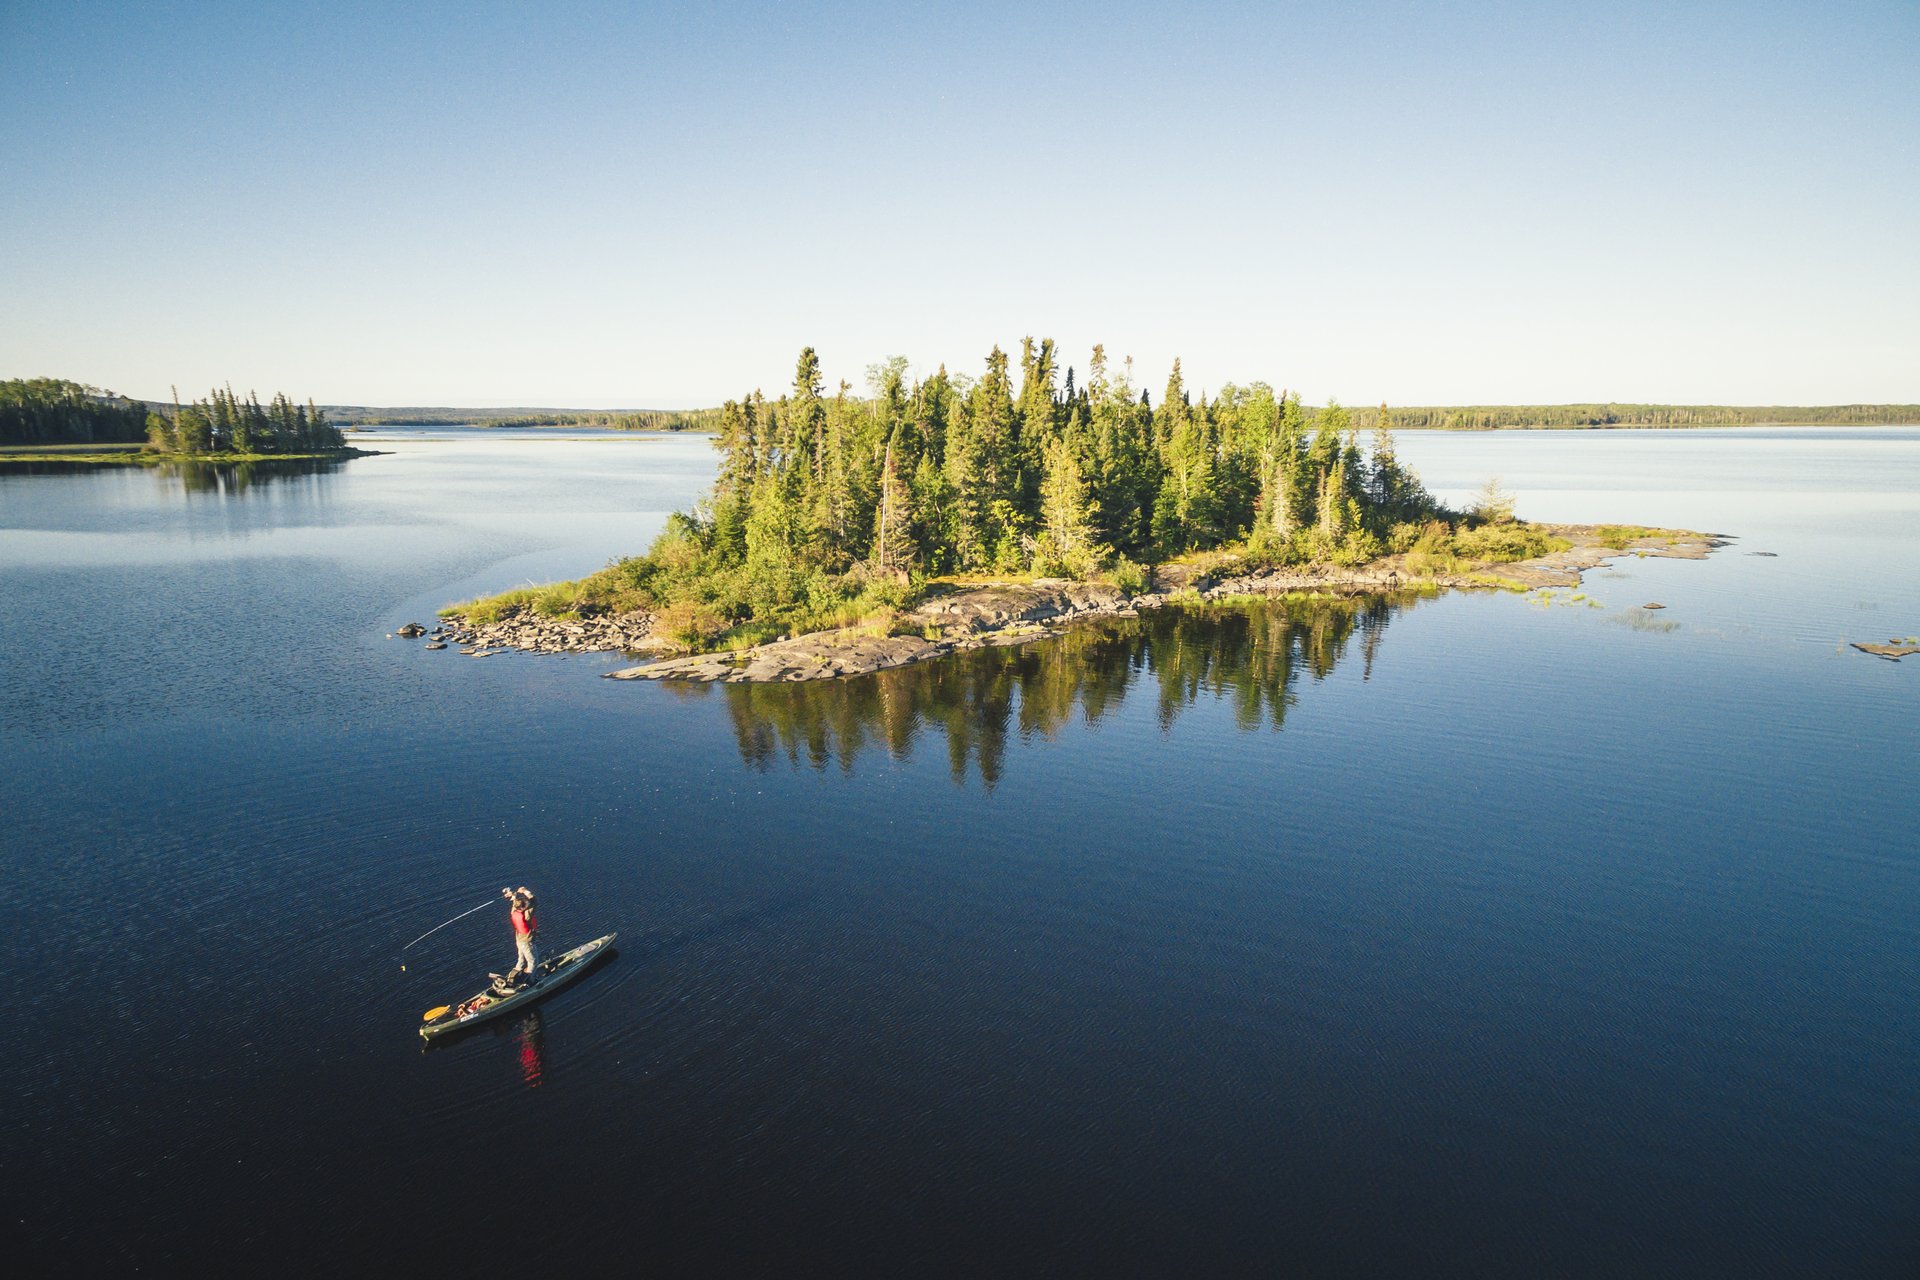 kayak angler stands and casts in front of small island on a Wabakimi lake